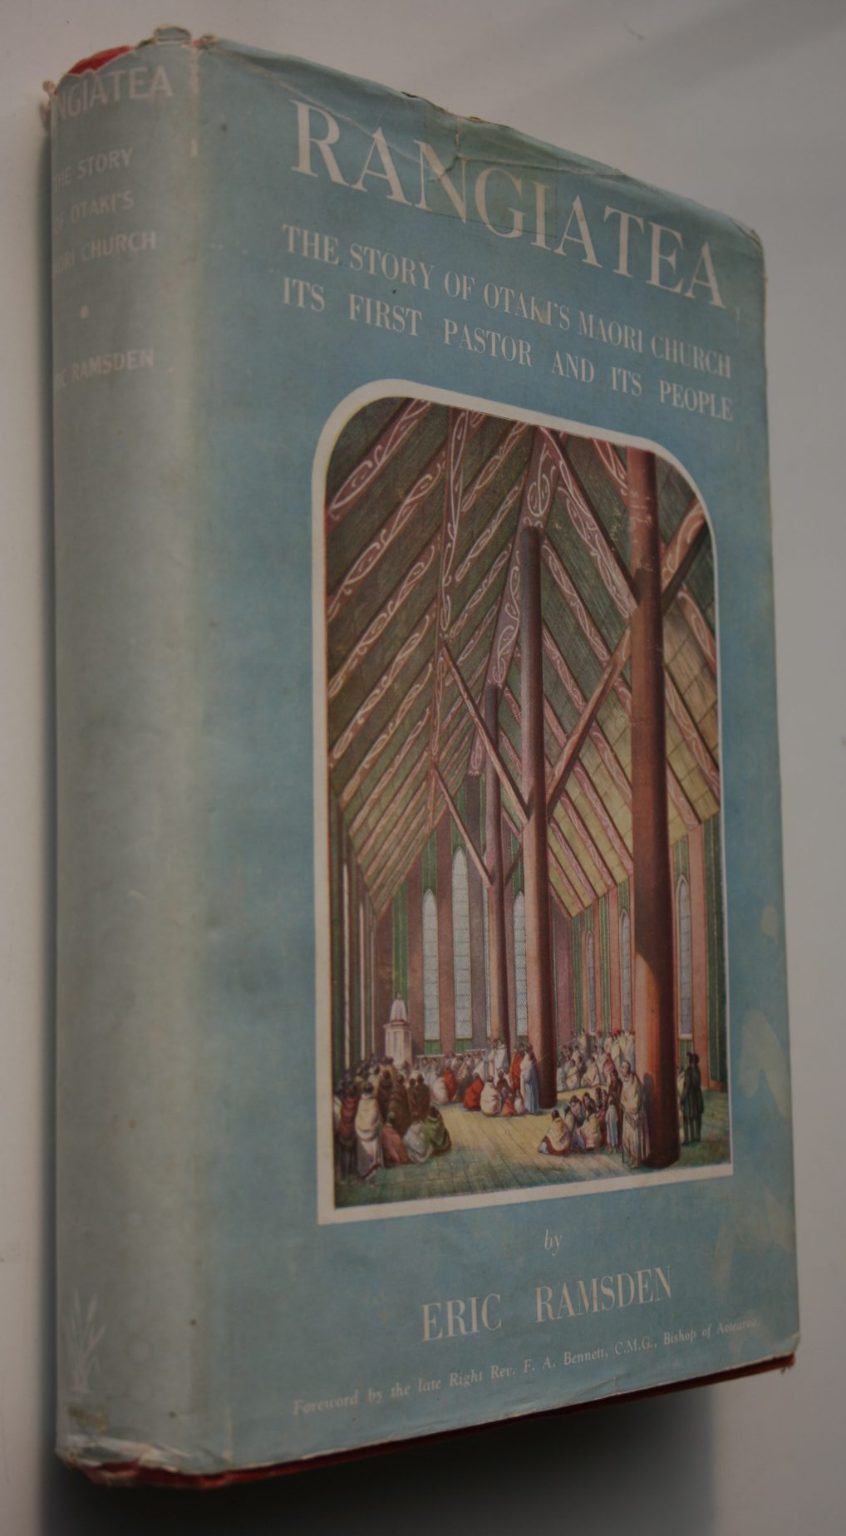 Rangiatea. The Story of the Otaki Church its First pastor and its People by Eric Ramsden.  1951, First Edition.